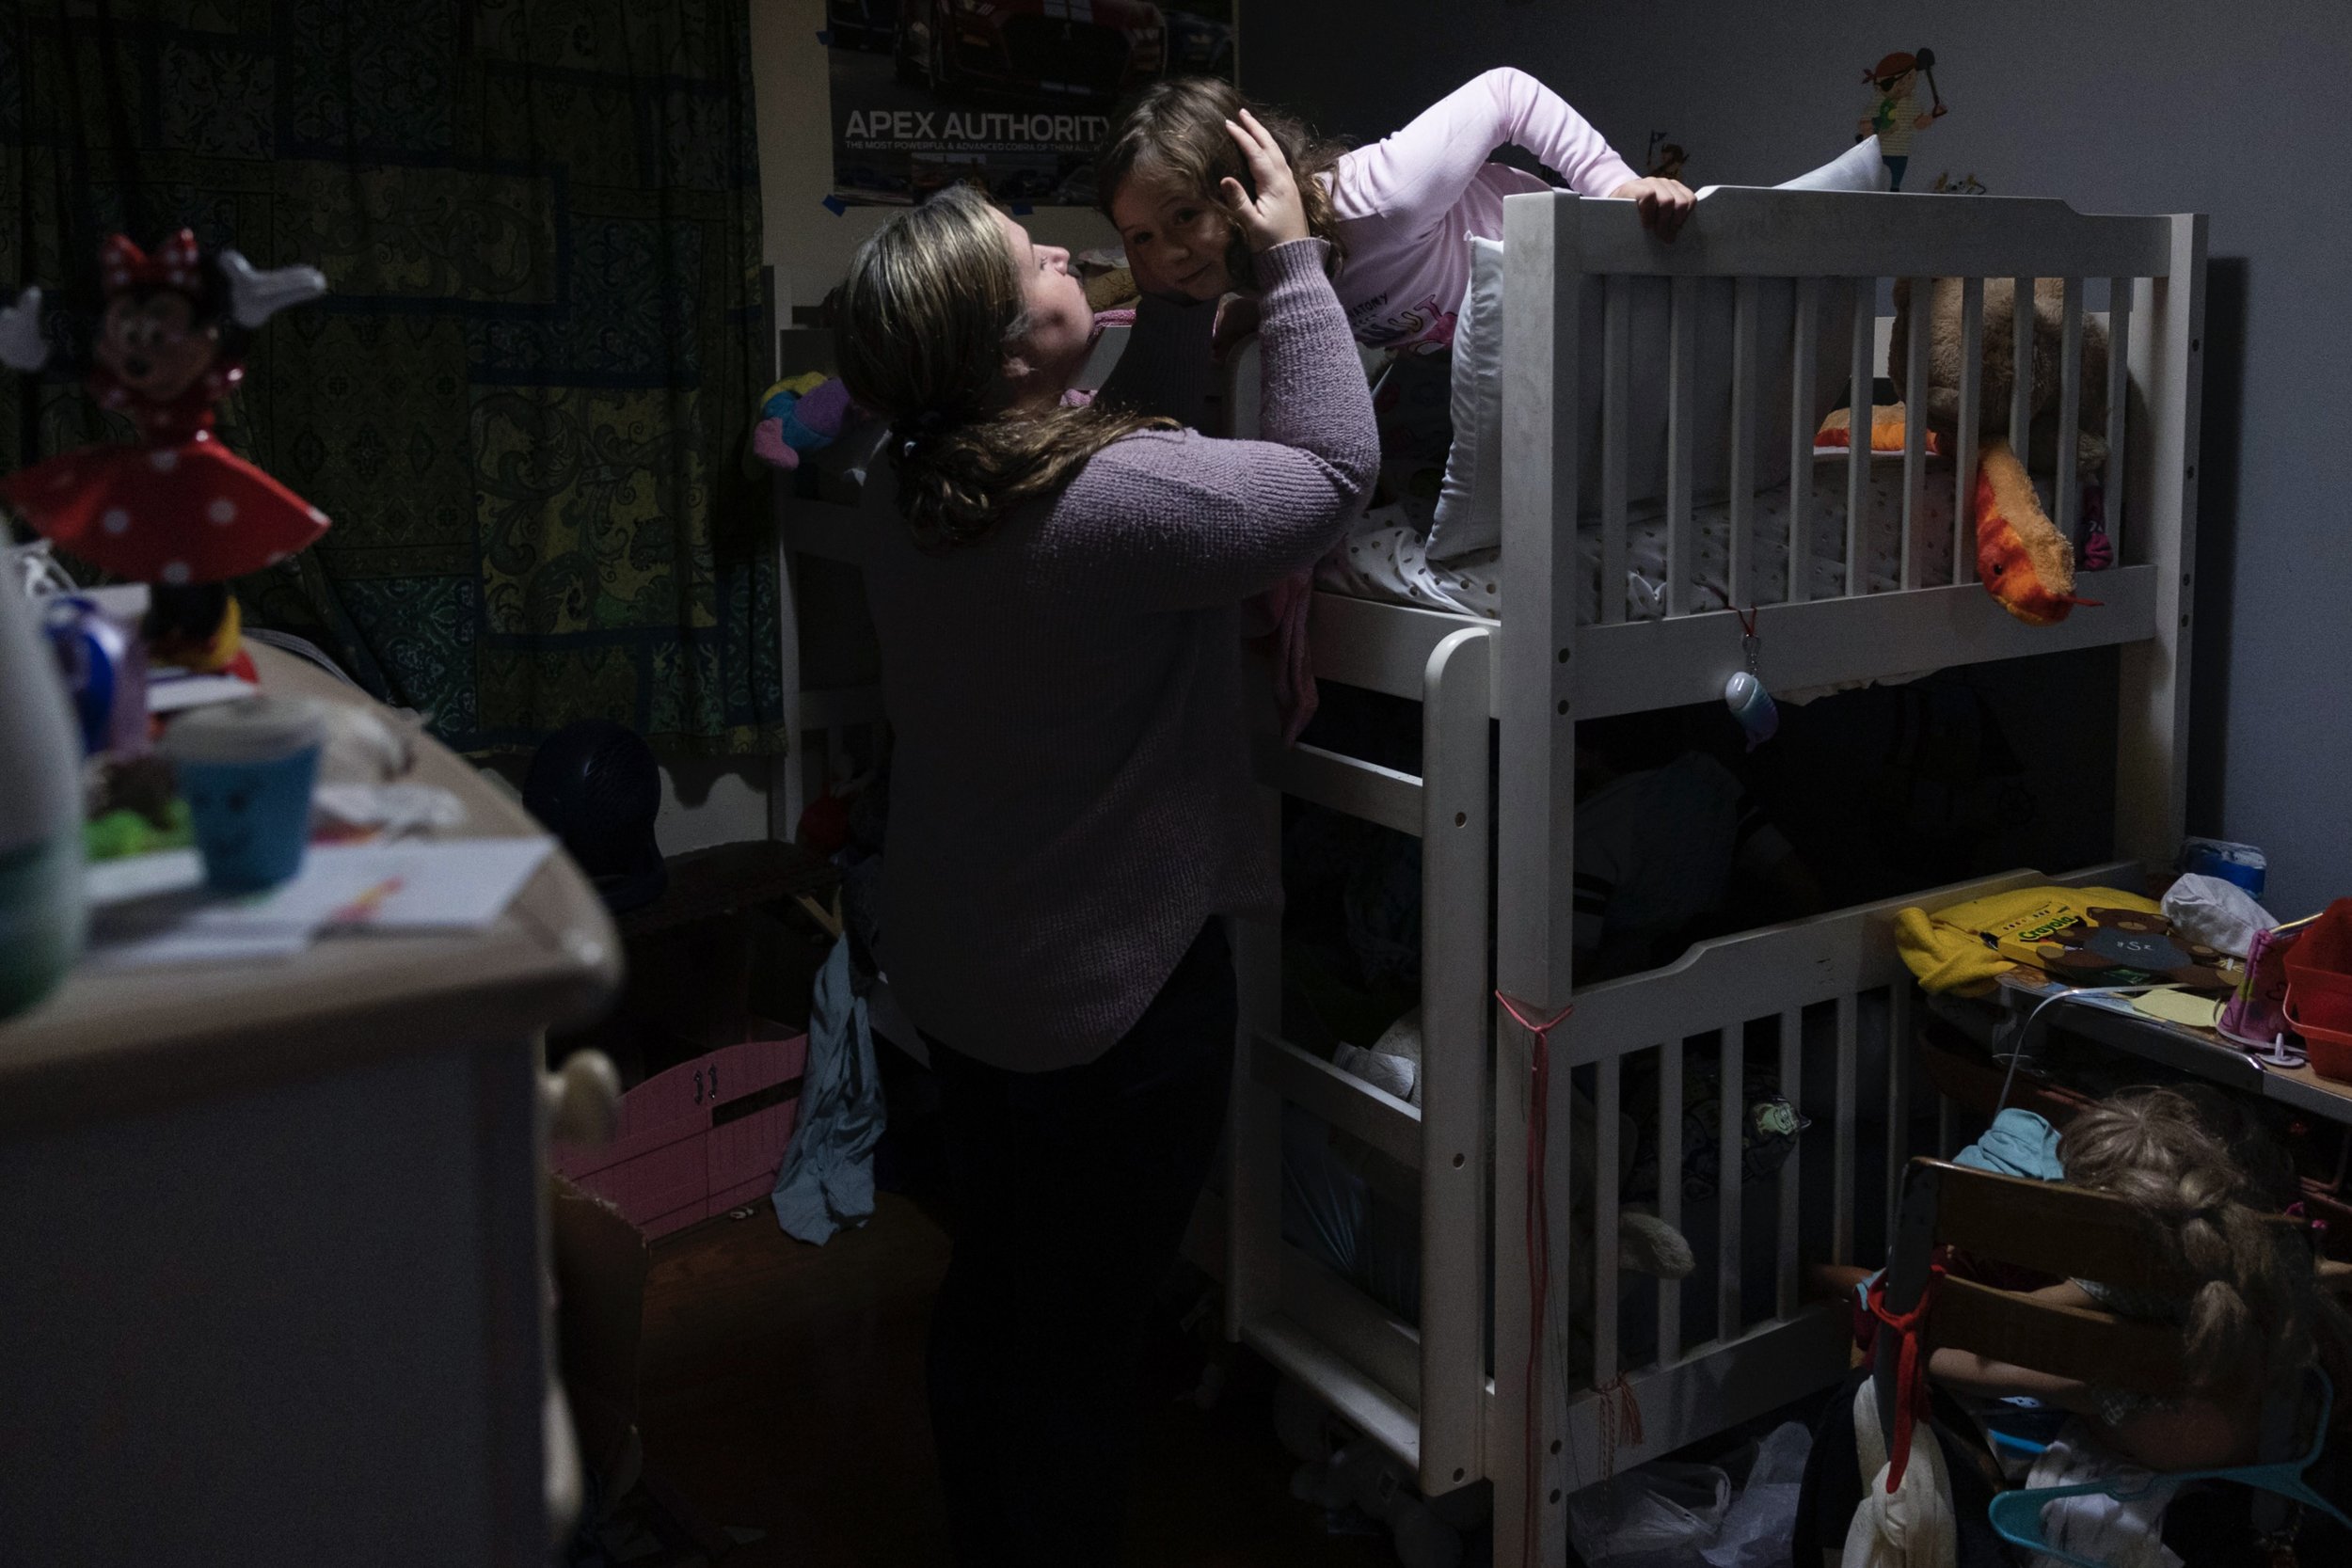  Jennifer Simpkins says goodnight to her daughter Evelyn Simpkins, 10, at their home in Downingtown, Pennsylvania on October 27, 2021. (On assignment for New York Times) 